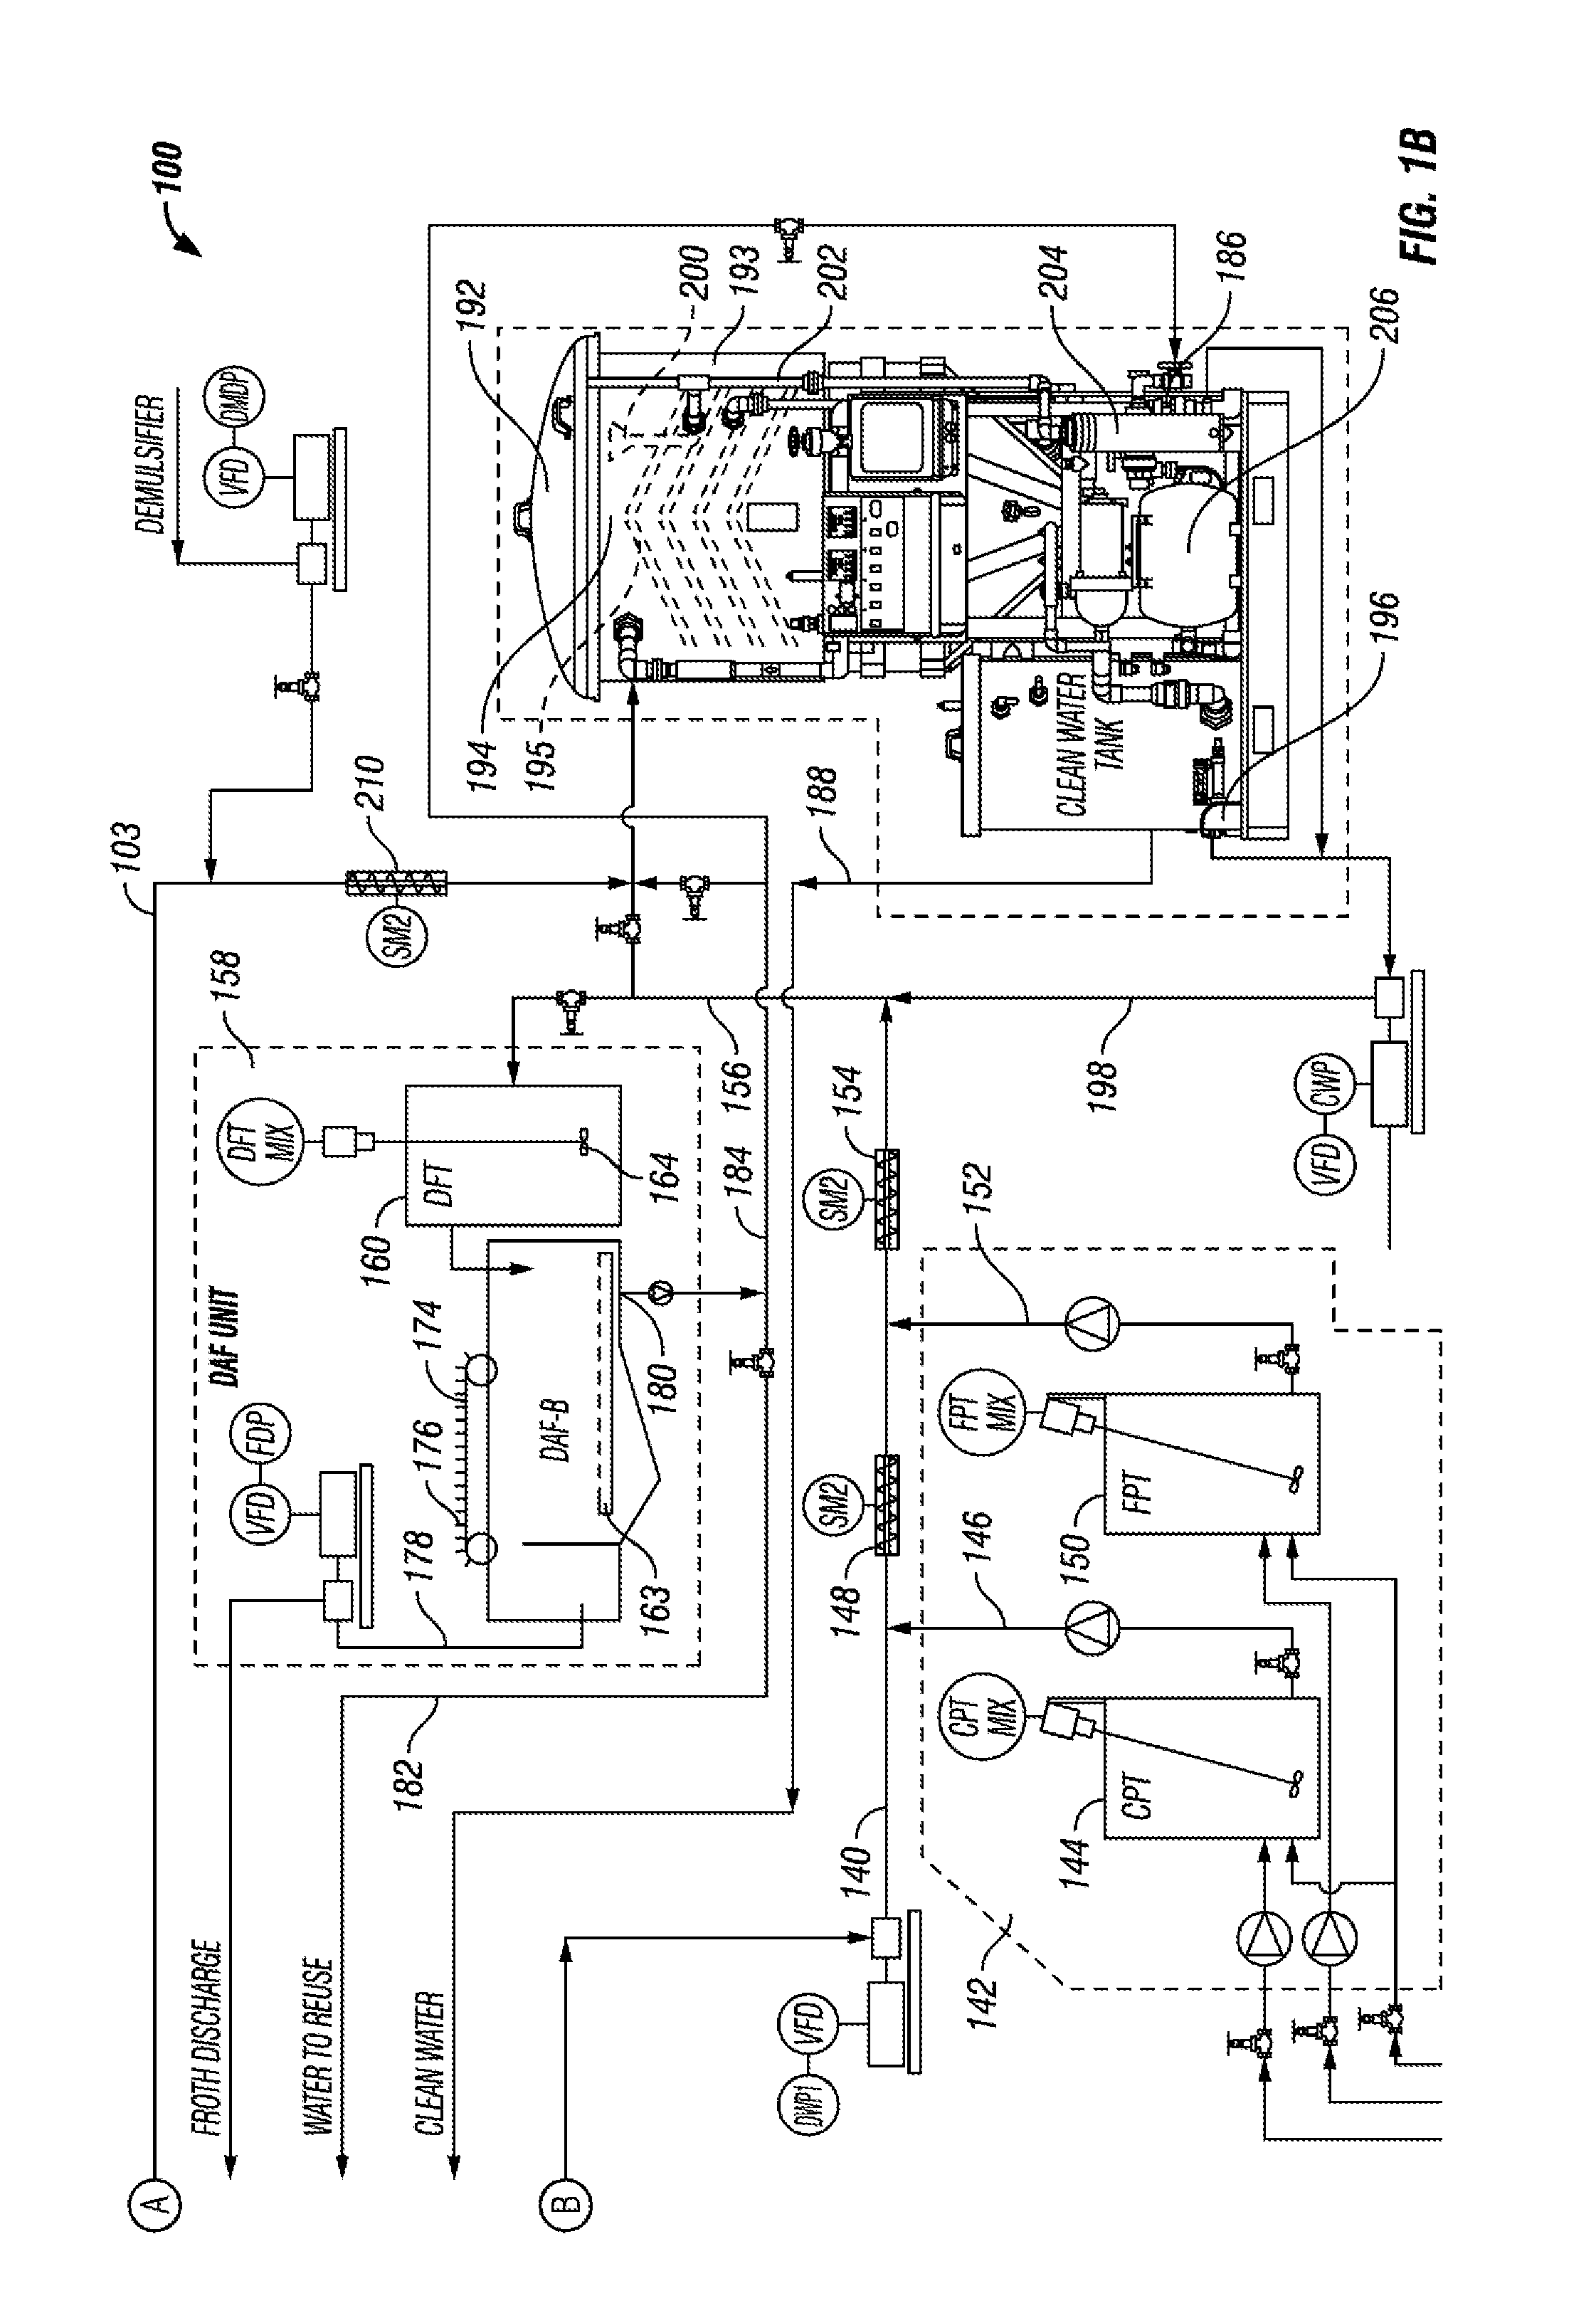 Apparatus for separation of water from oil-based drilling fluid and advanced water treatment